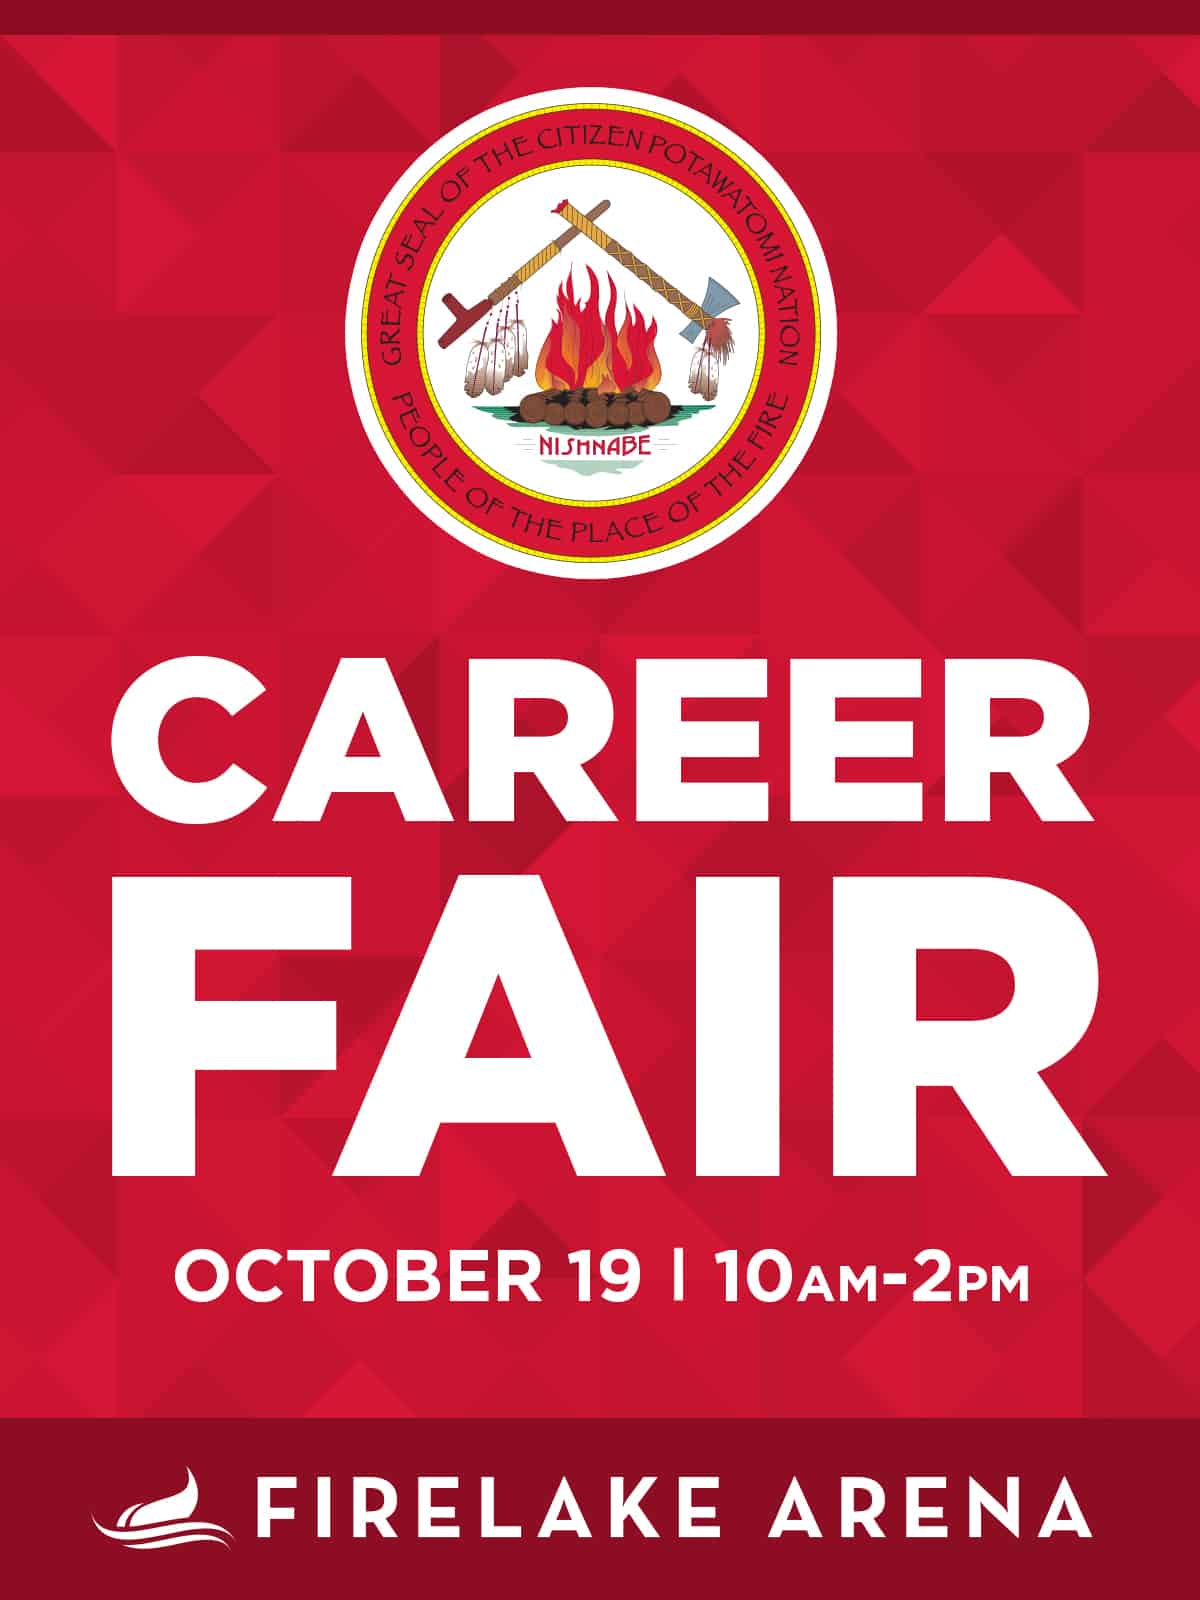 A red background with white text announcing the October 19, 2022 Career Fair at FireLake Arena sponsored by Citizen Potawatomi Nation and the Central Oklahoma Workforce Innovation Board.